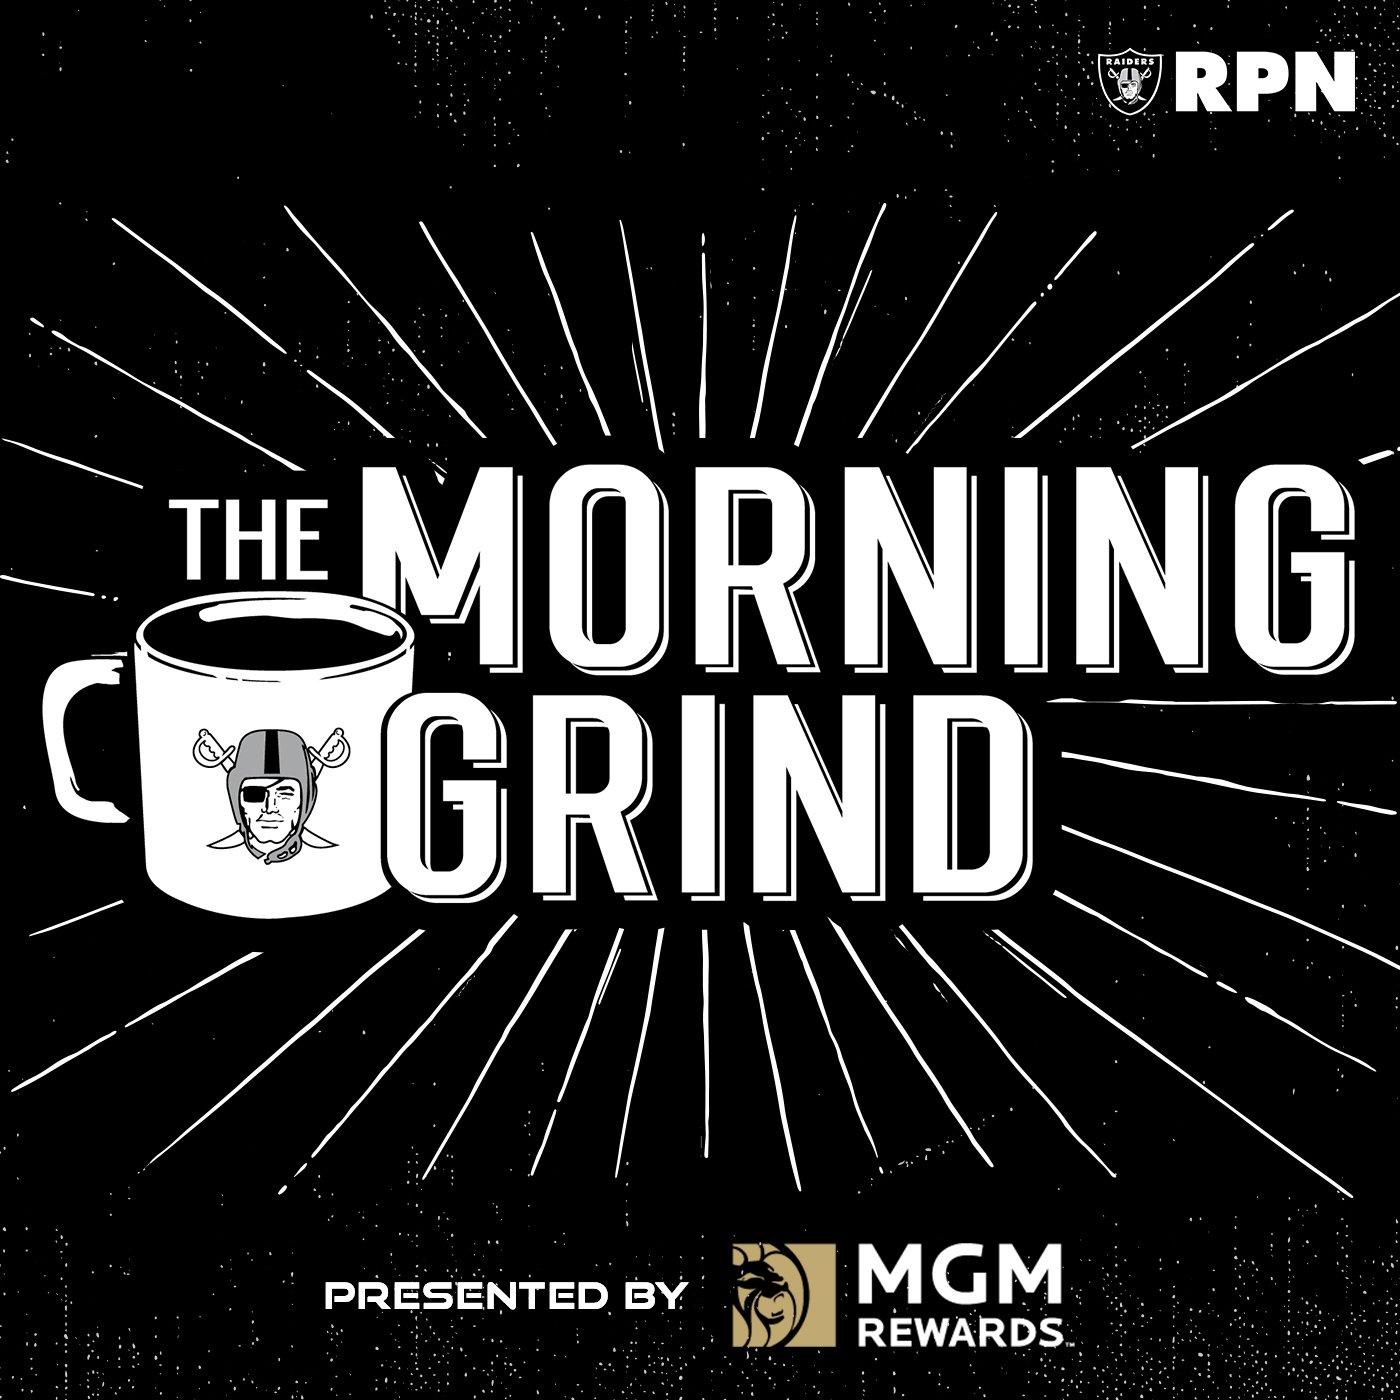 Despite the Week 14 loss, Maxx Crosby continues to have a positive impact for the Raiders | The Morning Grind